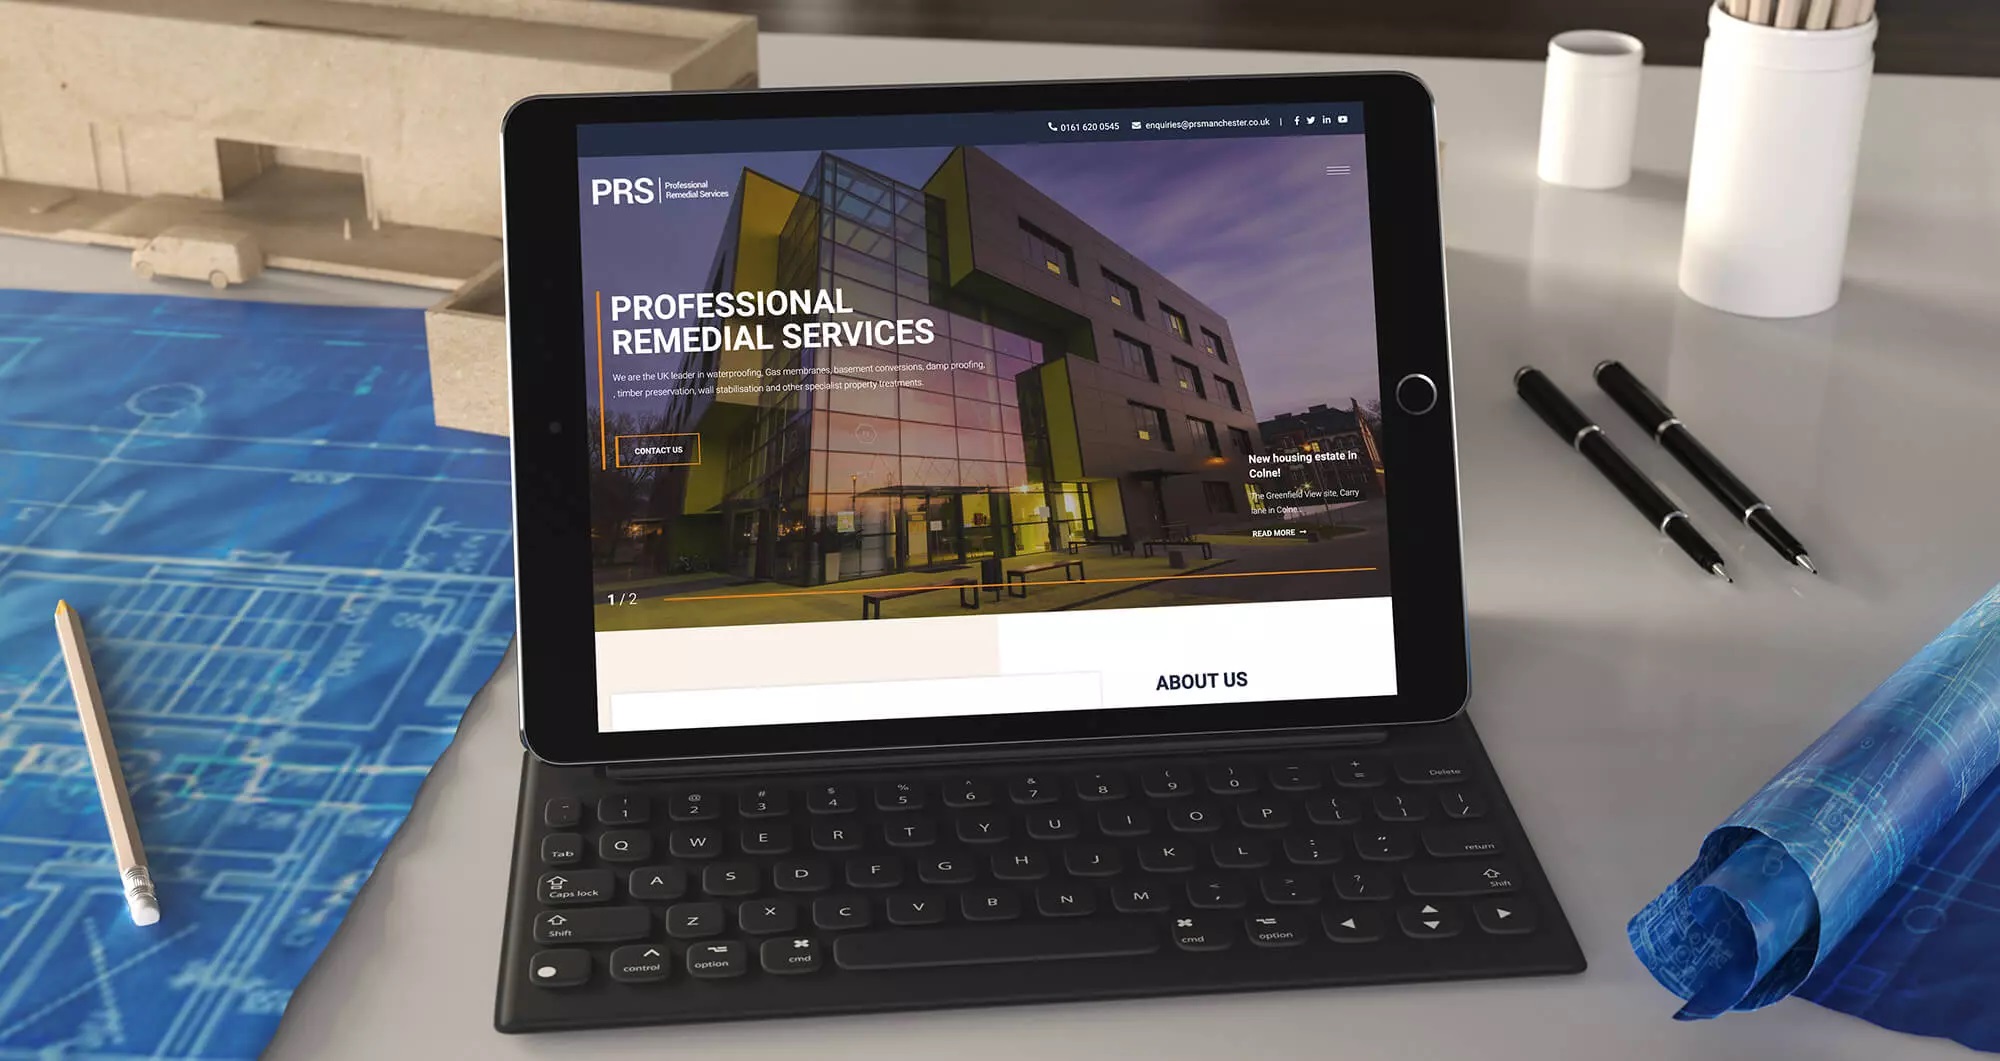 PRS website displayed on a tablet with keyboard